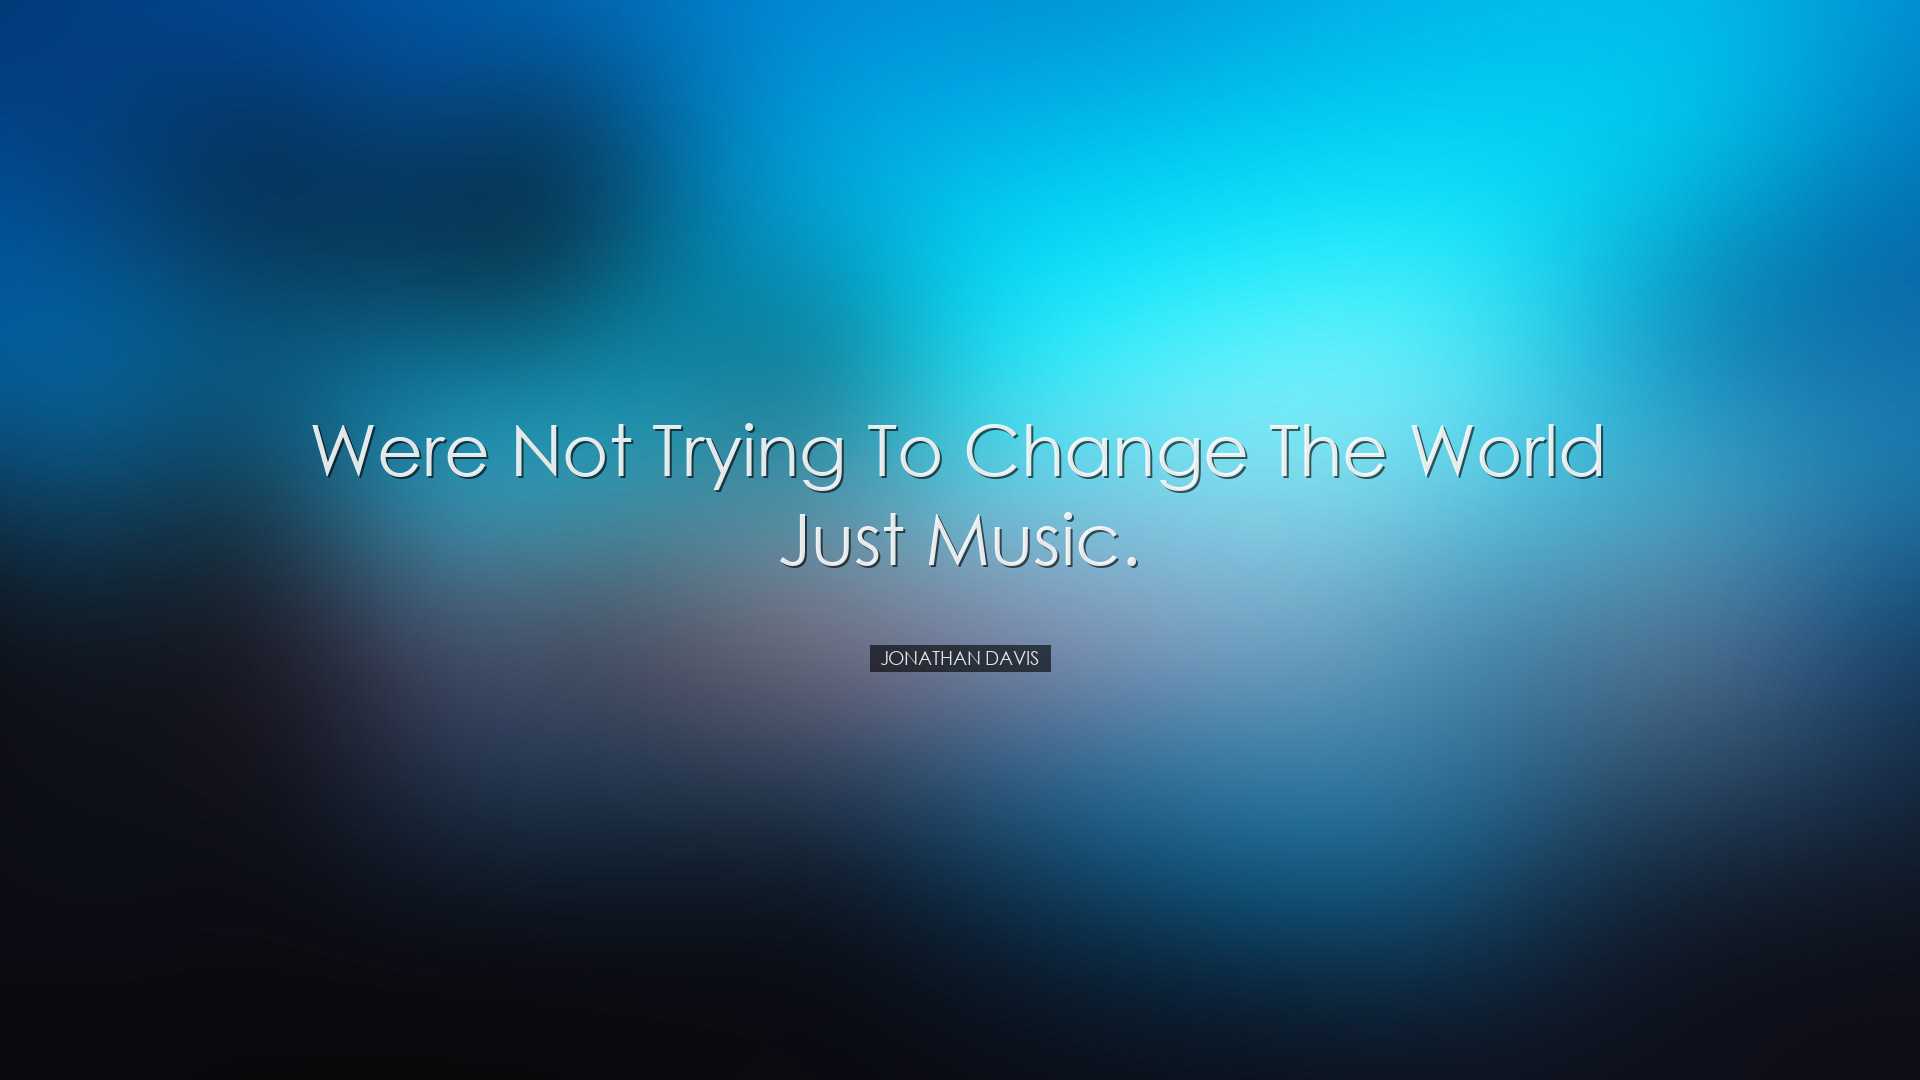 Were not trying to change the world just music. - Jonathan Davis